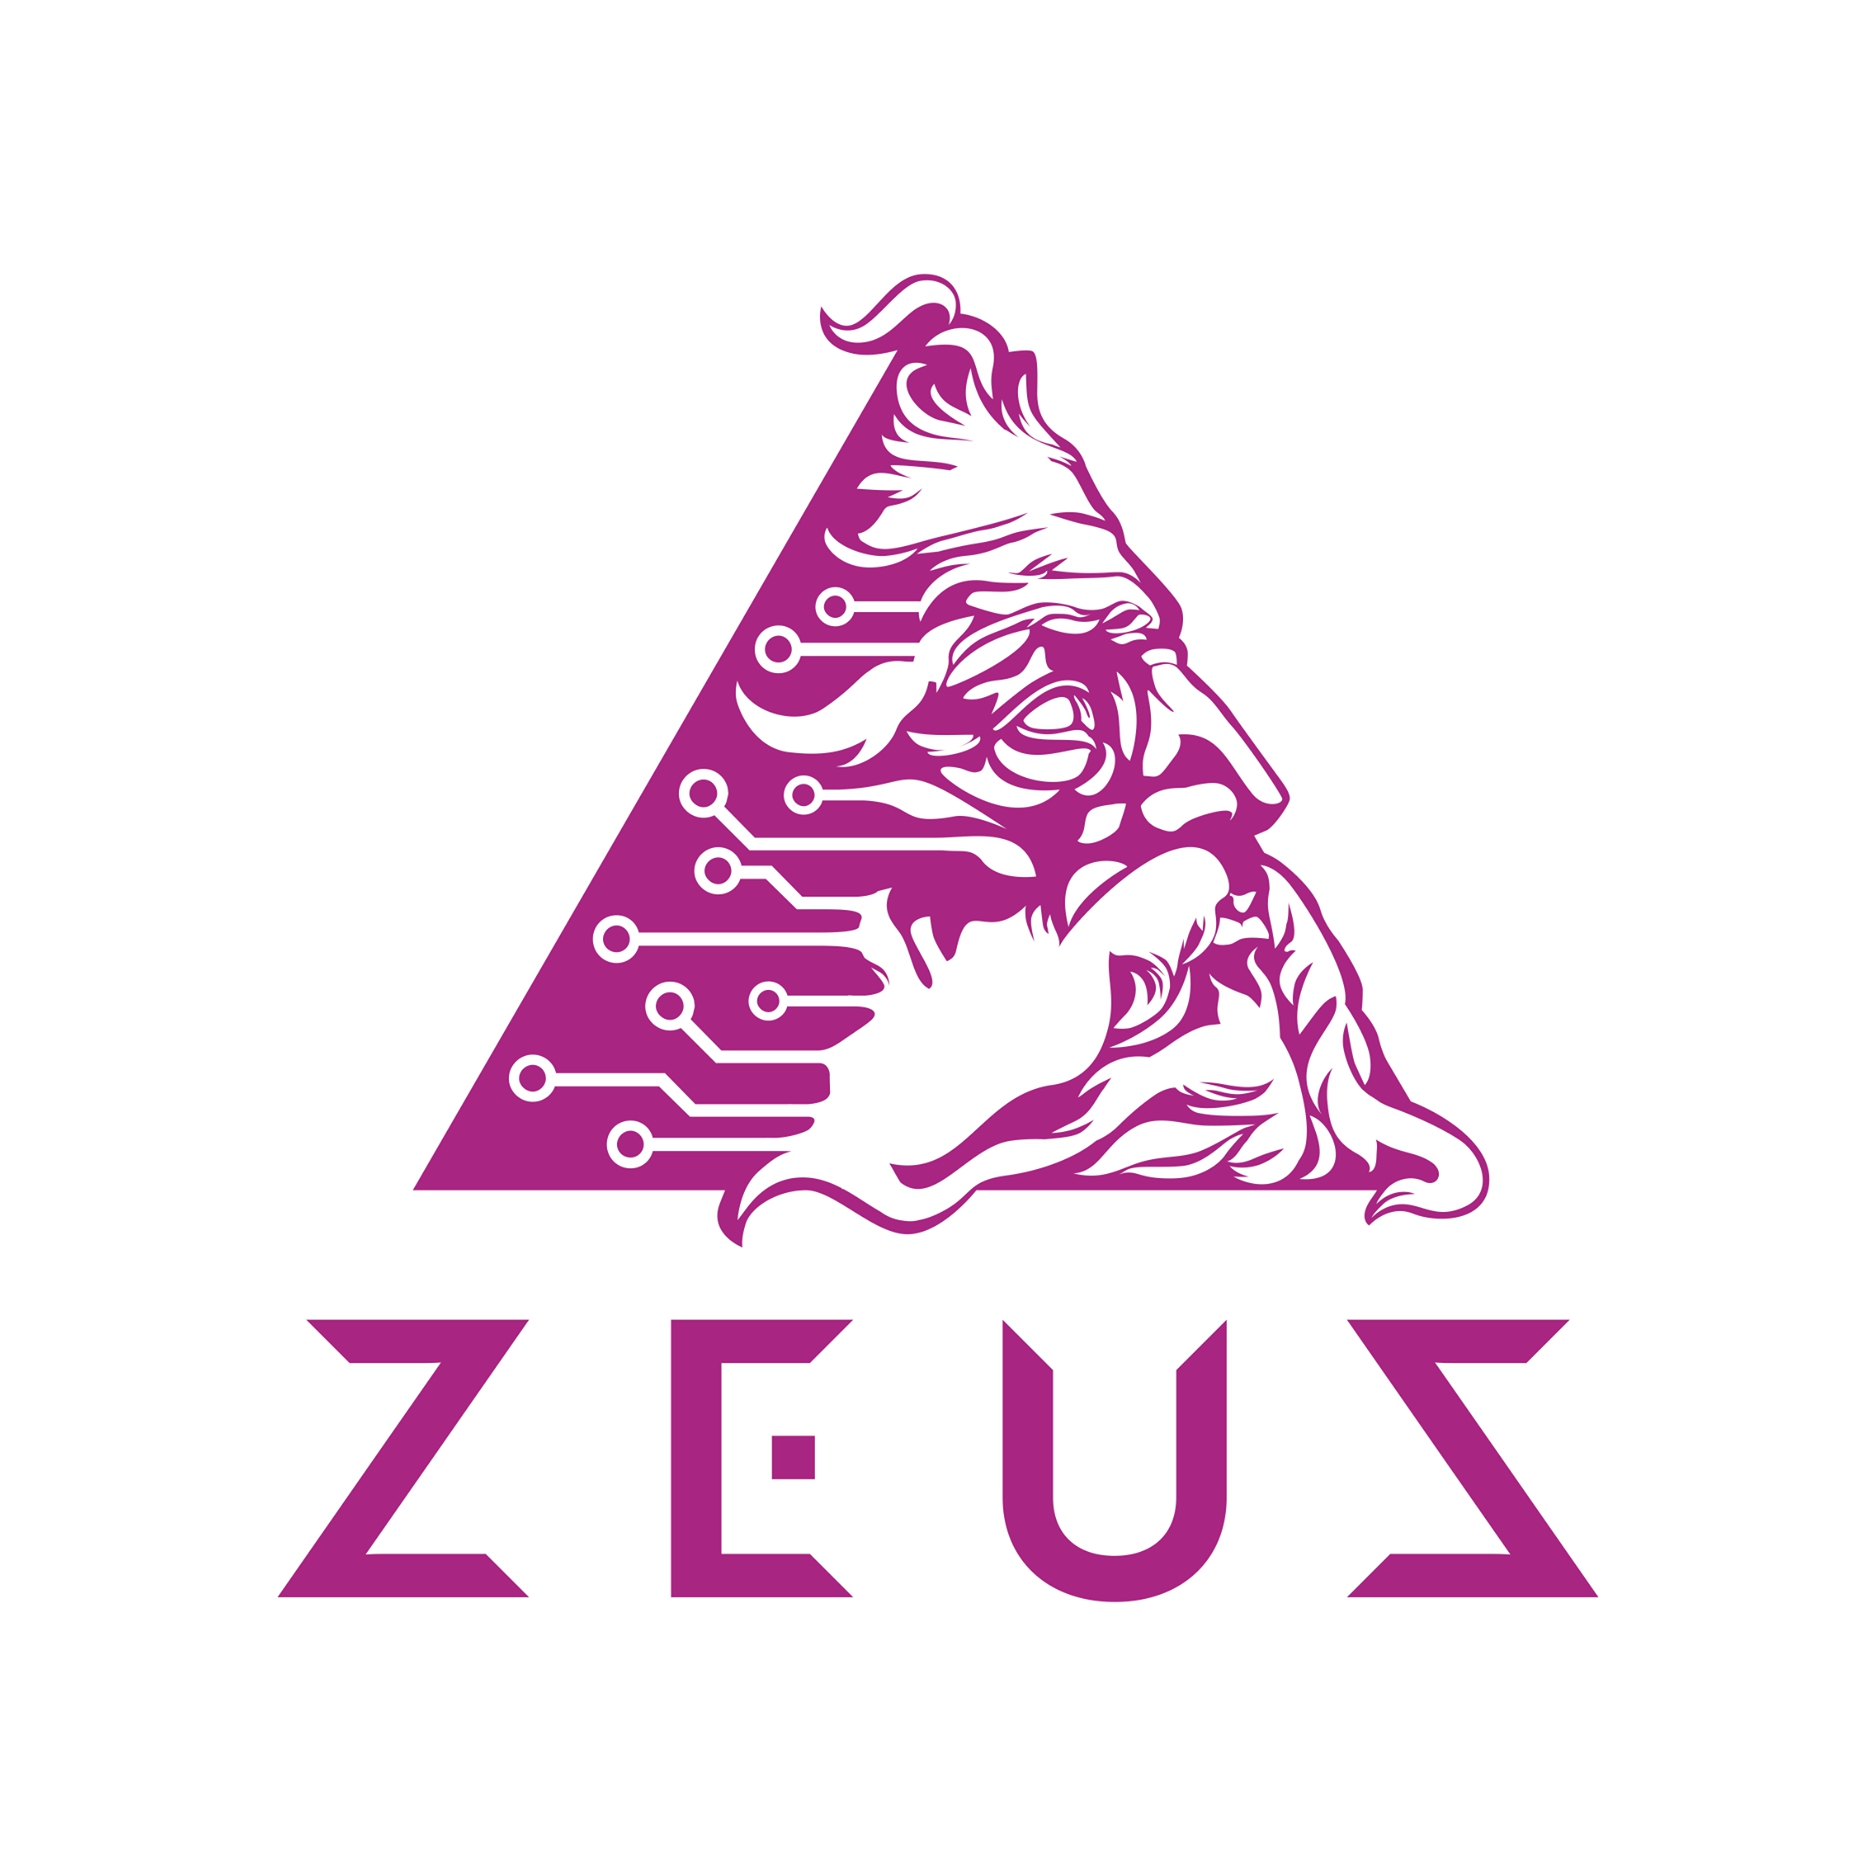 Logo of the ZEUS project